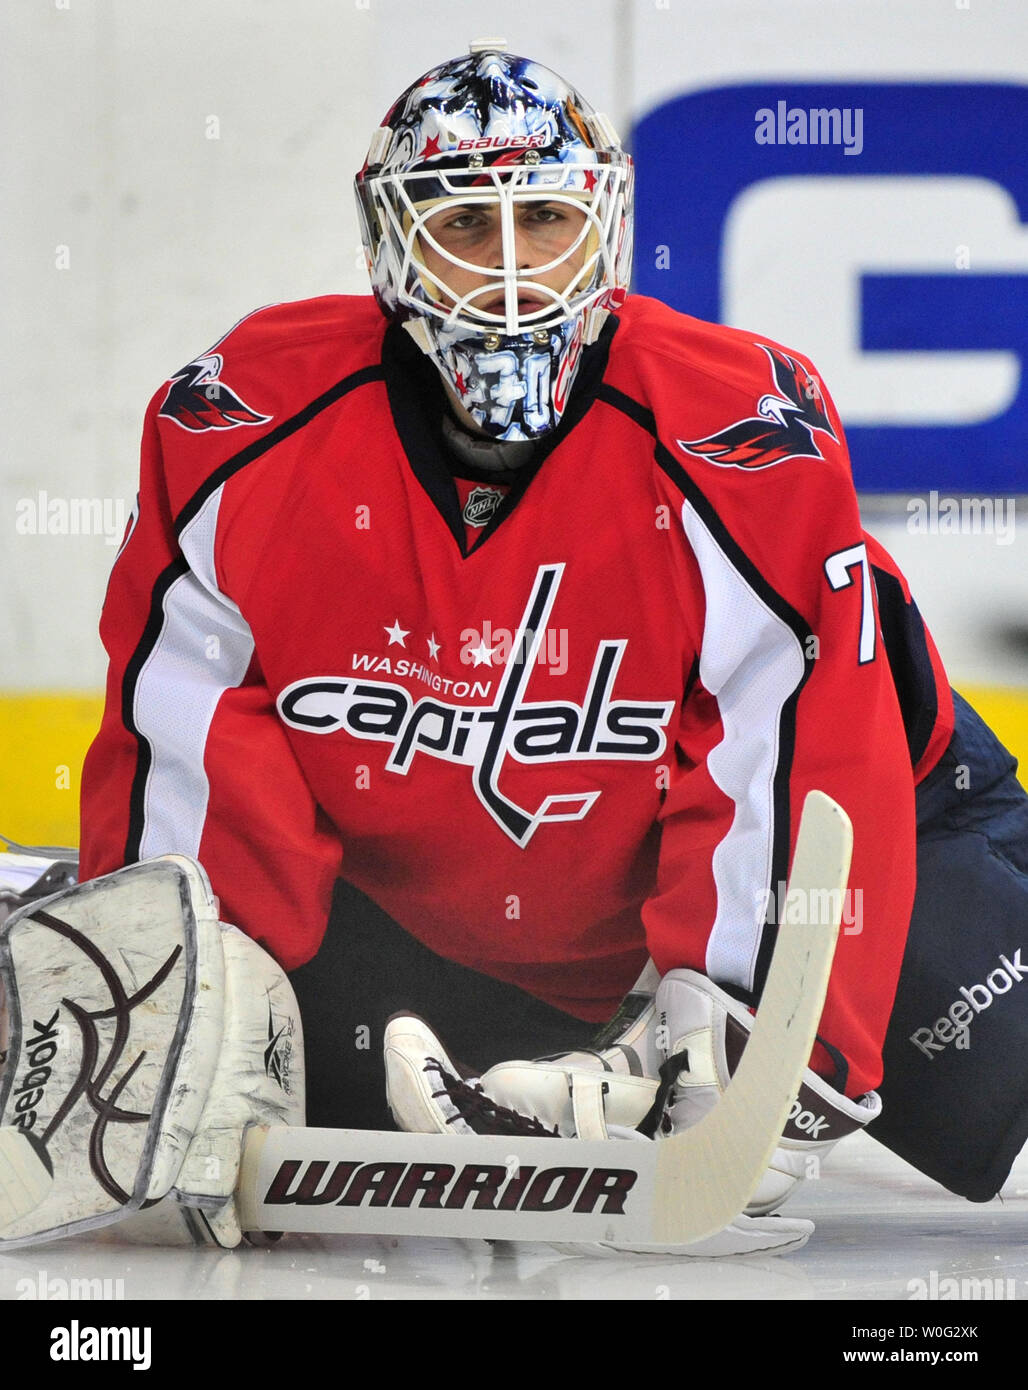 Washington Capitals goalie Braden Holtby warms up prior to the Capitals  game against the Philadelphia Flyers at the Verizon Center in Washington on  November 7, 2010. UPI/Kevin Dietsch Stock Photo - Alamy